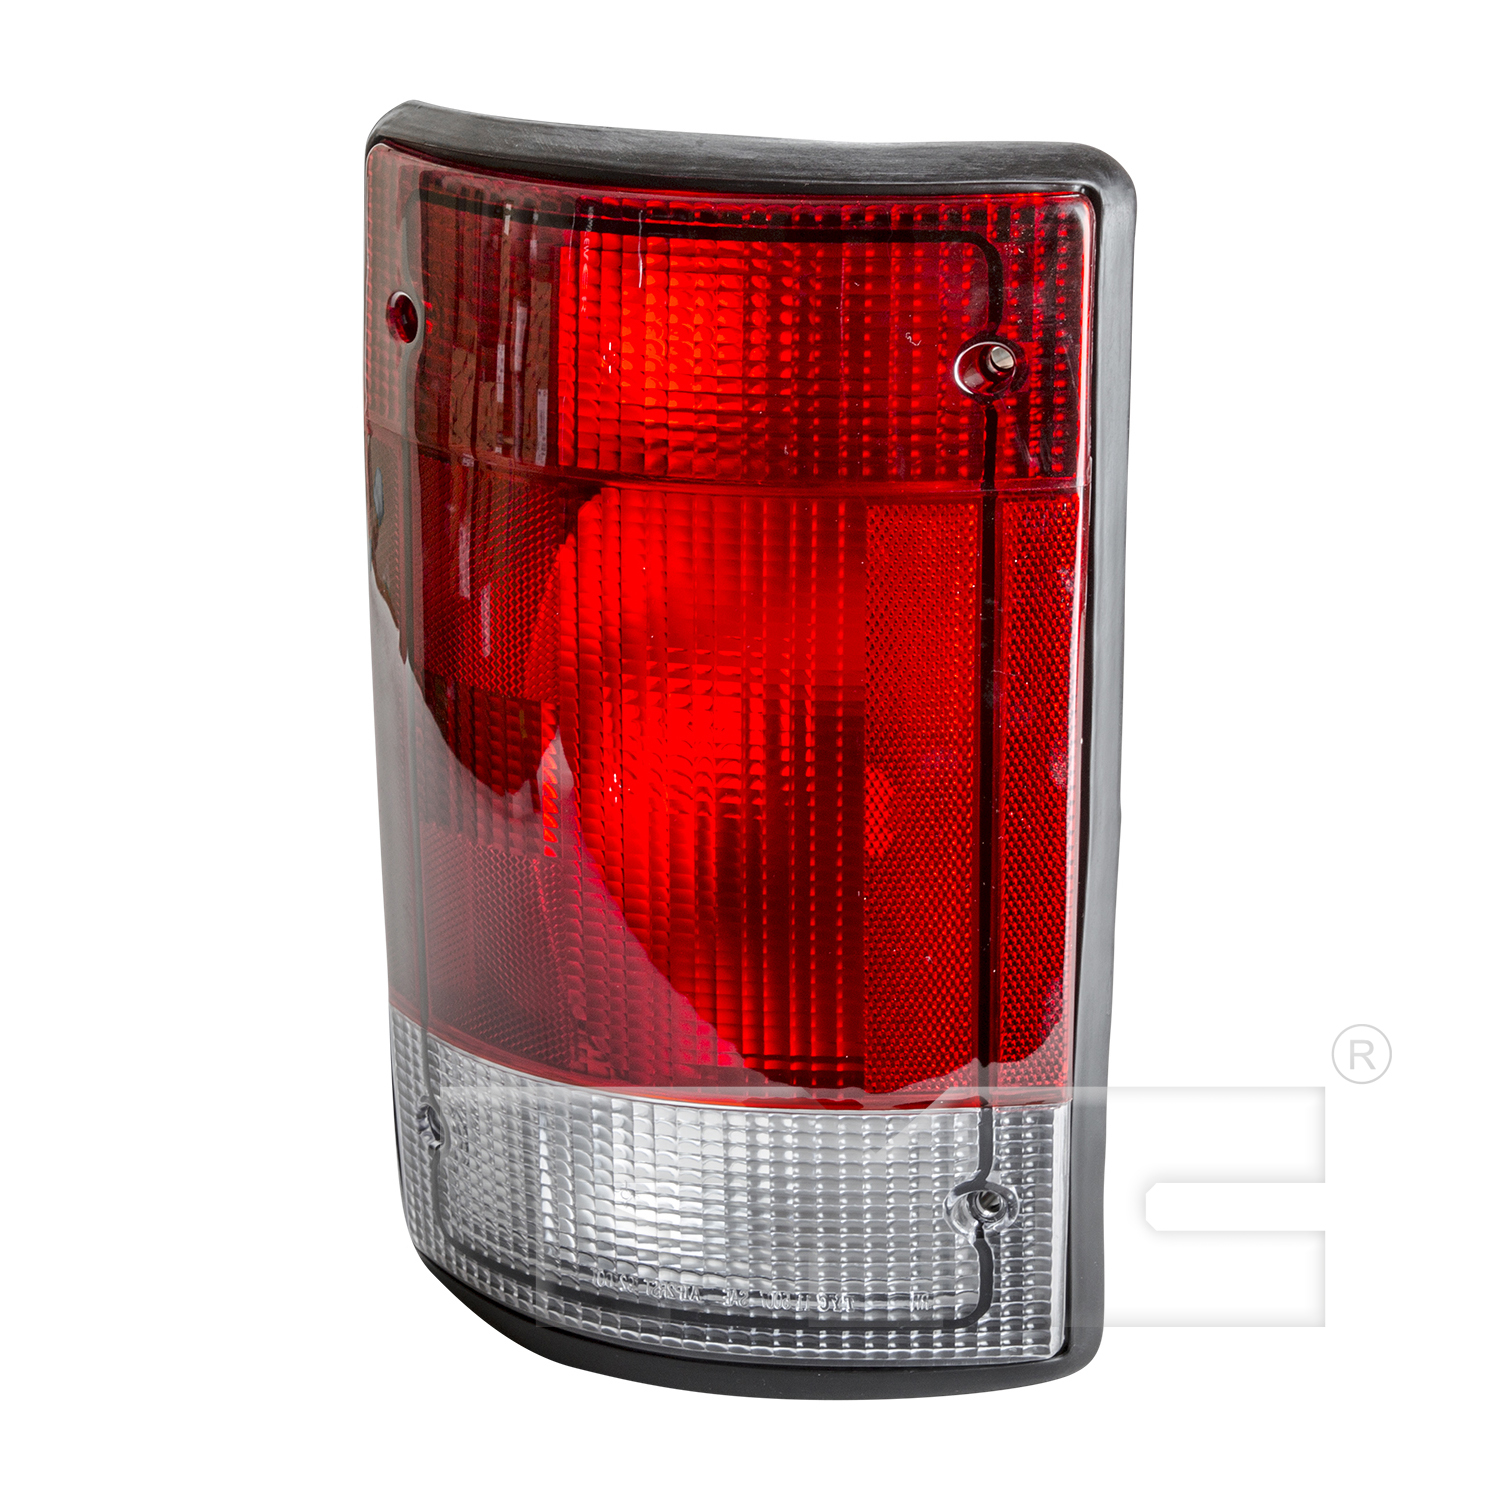 Aftermarket TAILLIGHTS for FORD - E-550 ECONOLINE SUPER DUTY, E-550 ECONOLINE SUPER DUTY,02-02,LT Taillamp assy